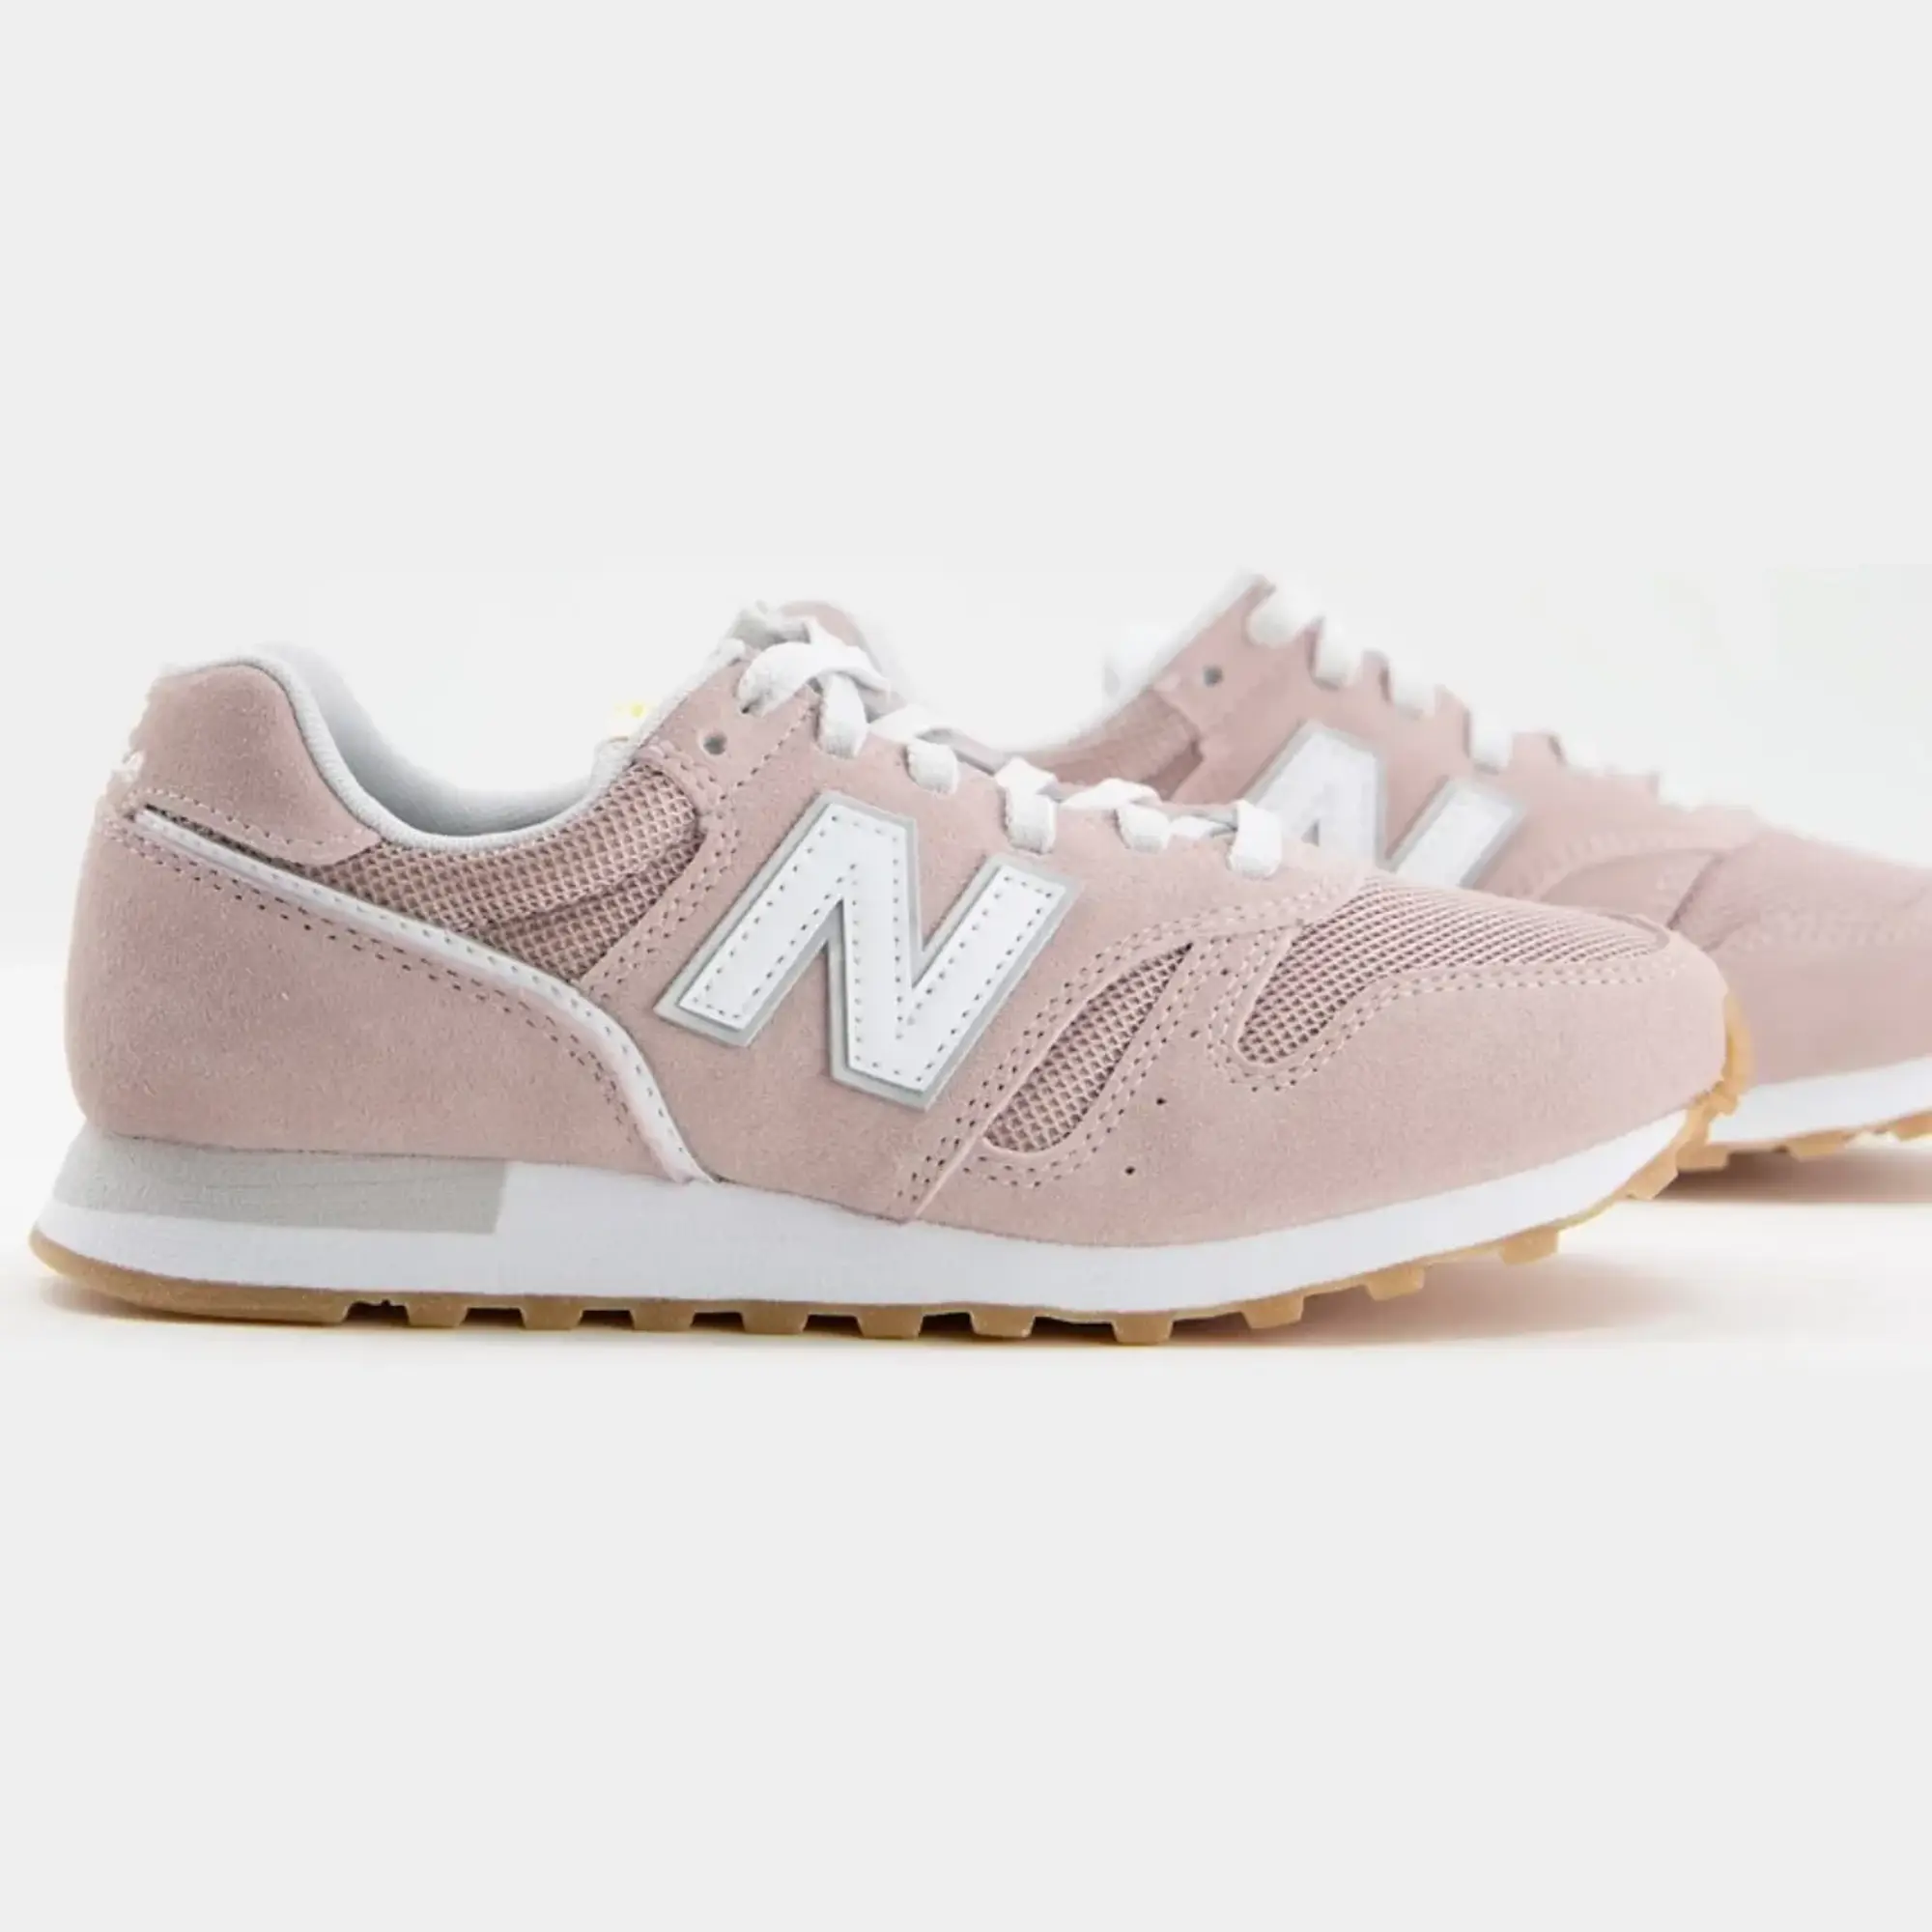 New Balance 373 Trainers In Pink And White